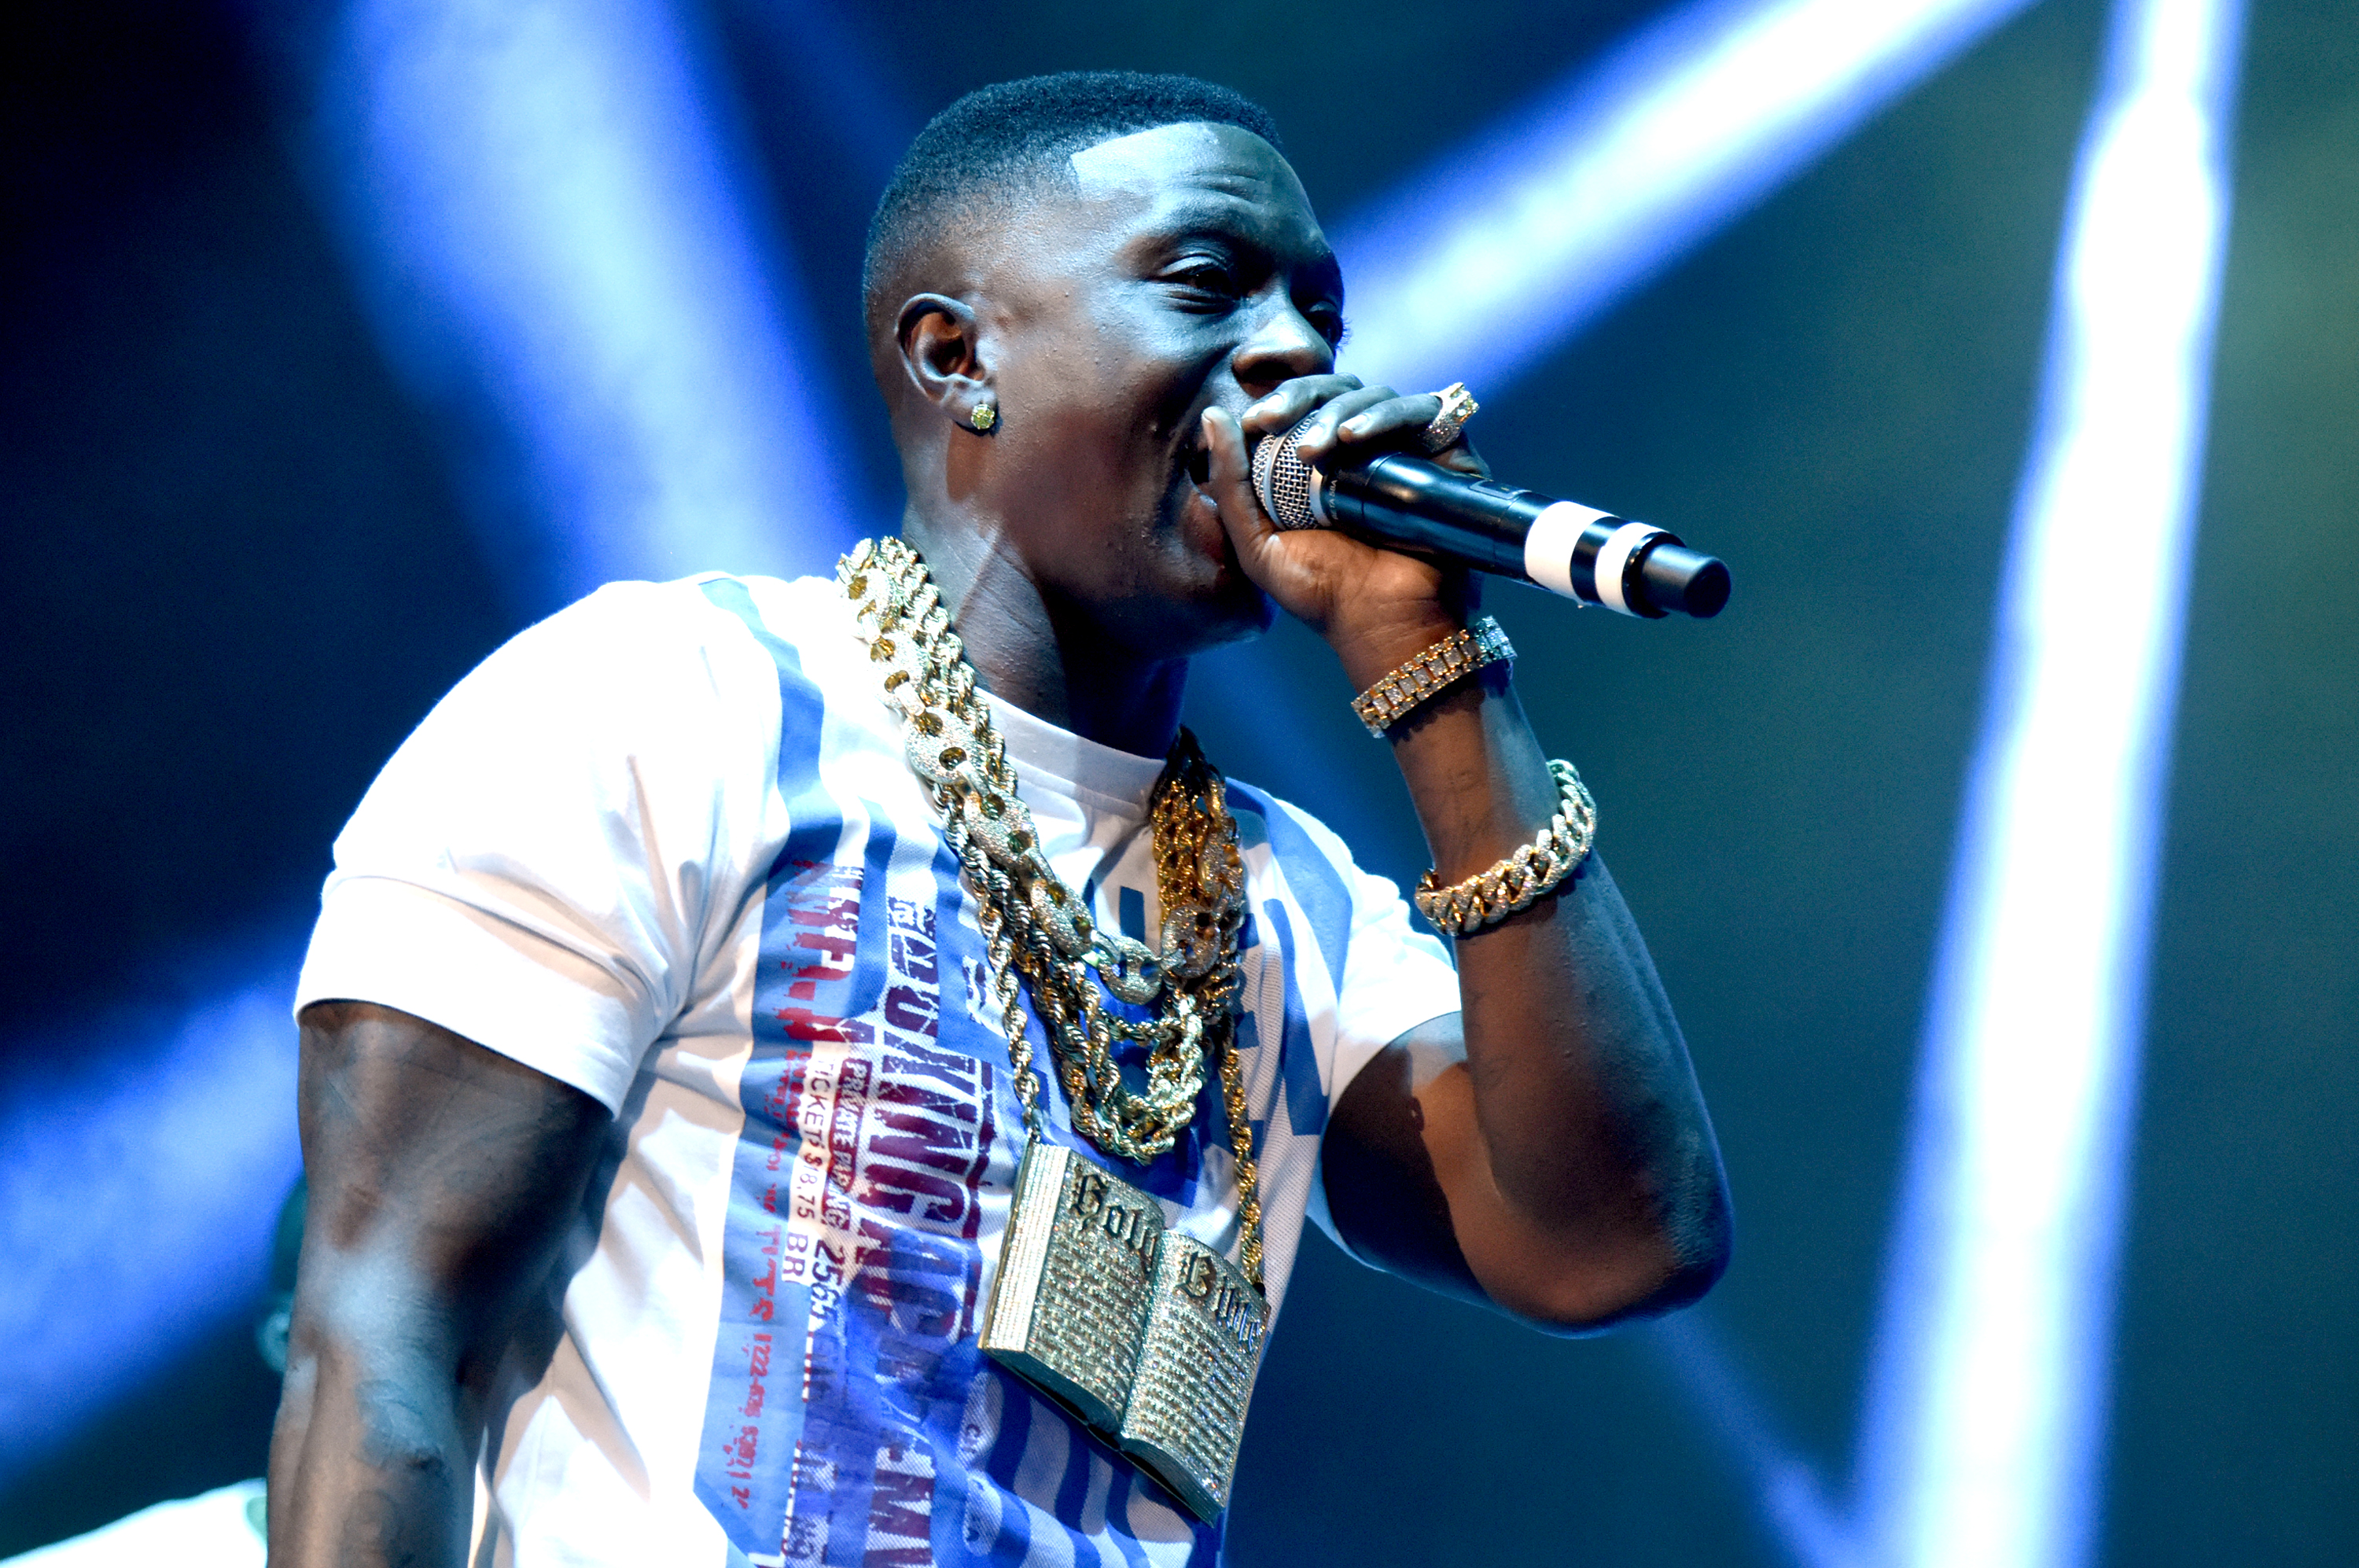 Boosie Badazz Released From Jail After Posting Bond